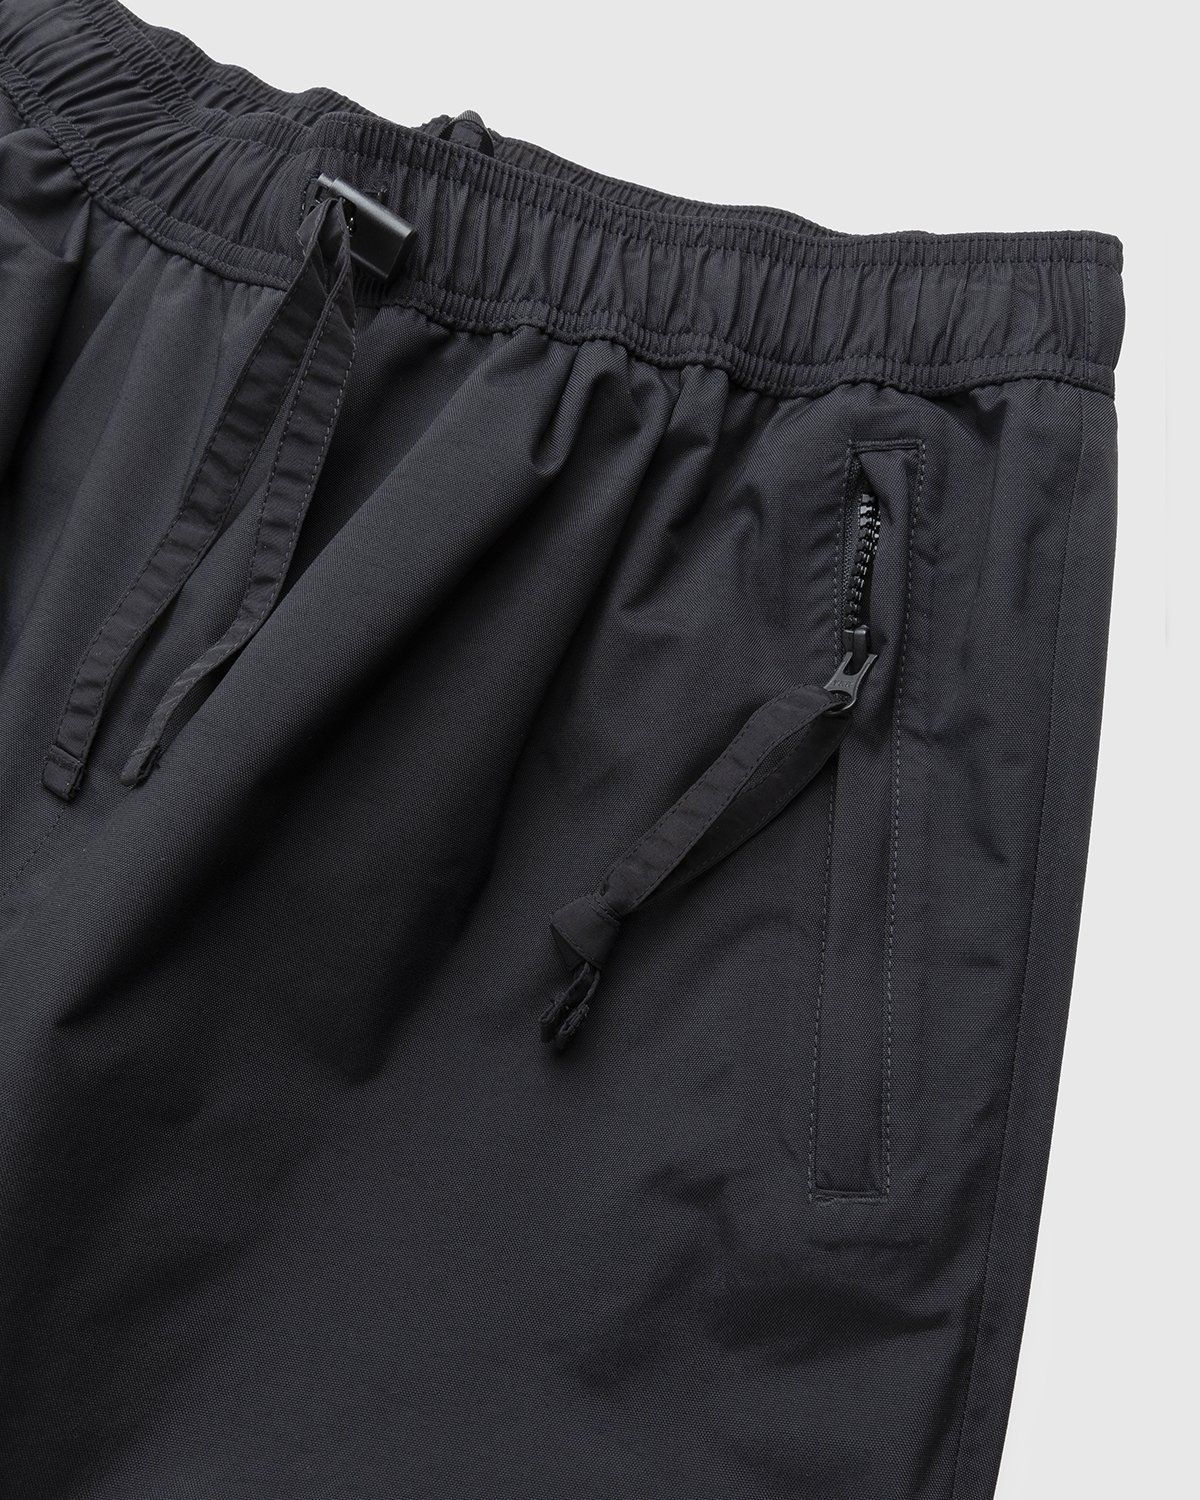 The North Face – Trans Antarctica Expedition Pant Black 